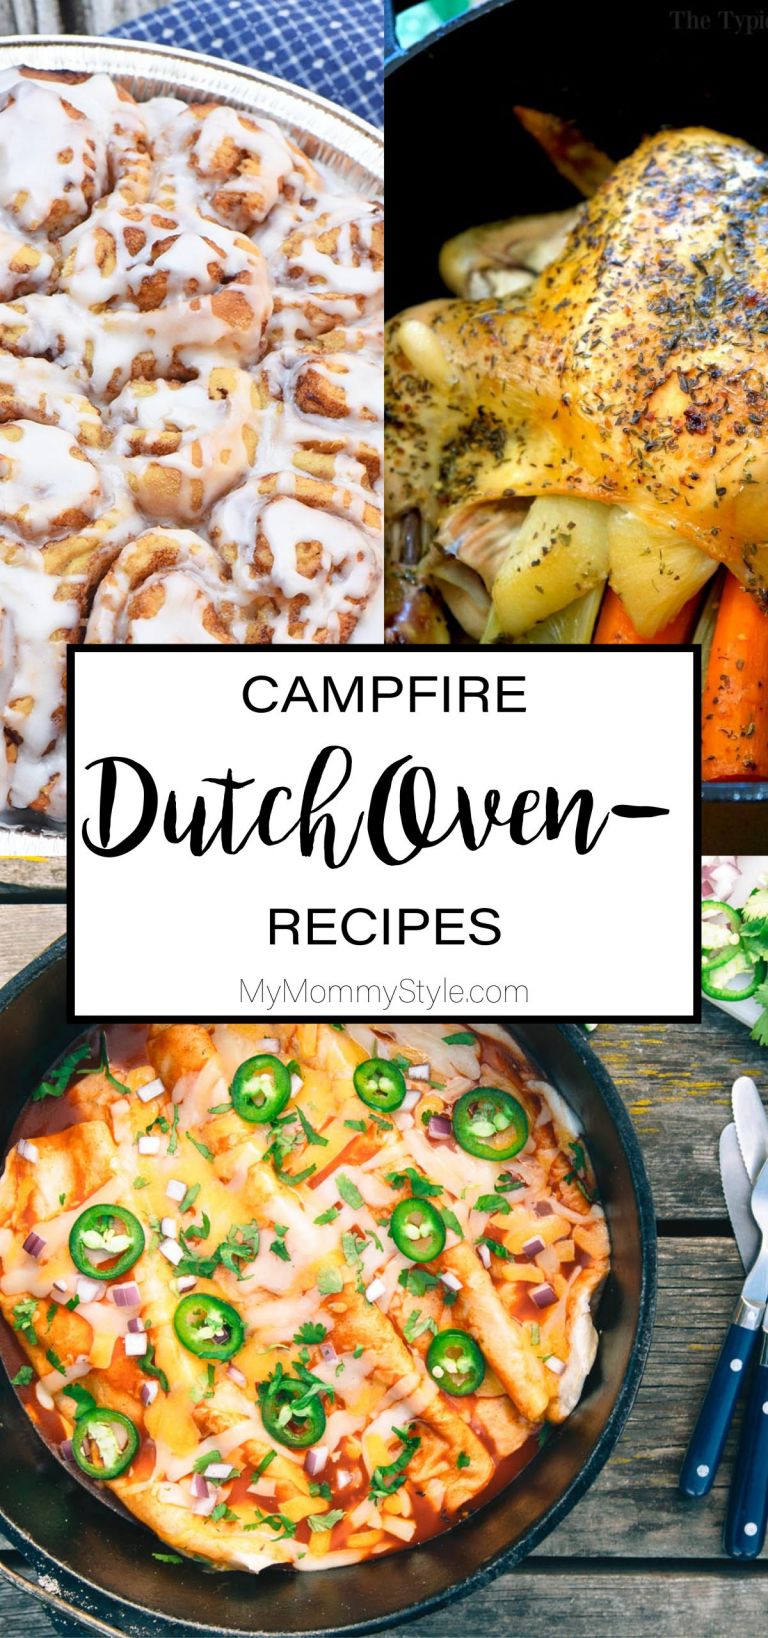 Best Dutch Oven Recipes for Camping and Cooking at Home - Sunset